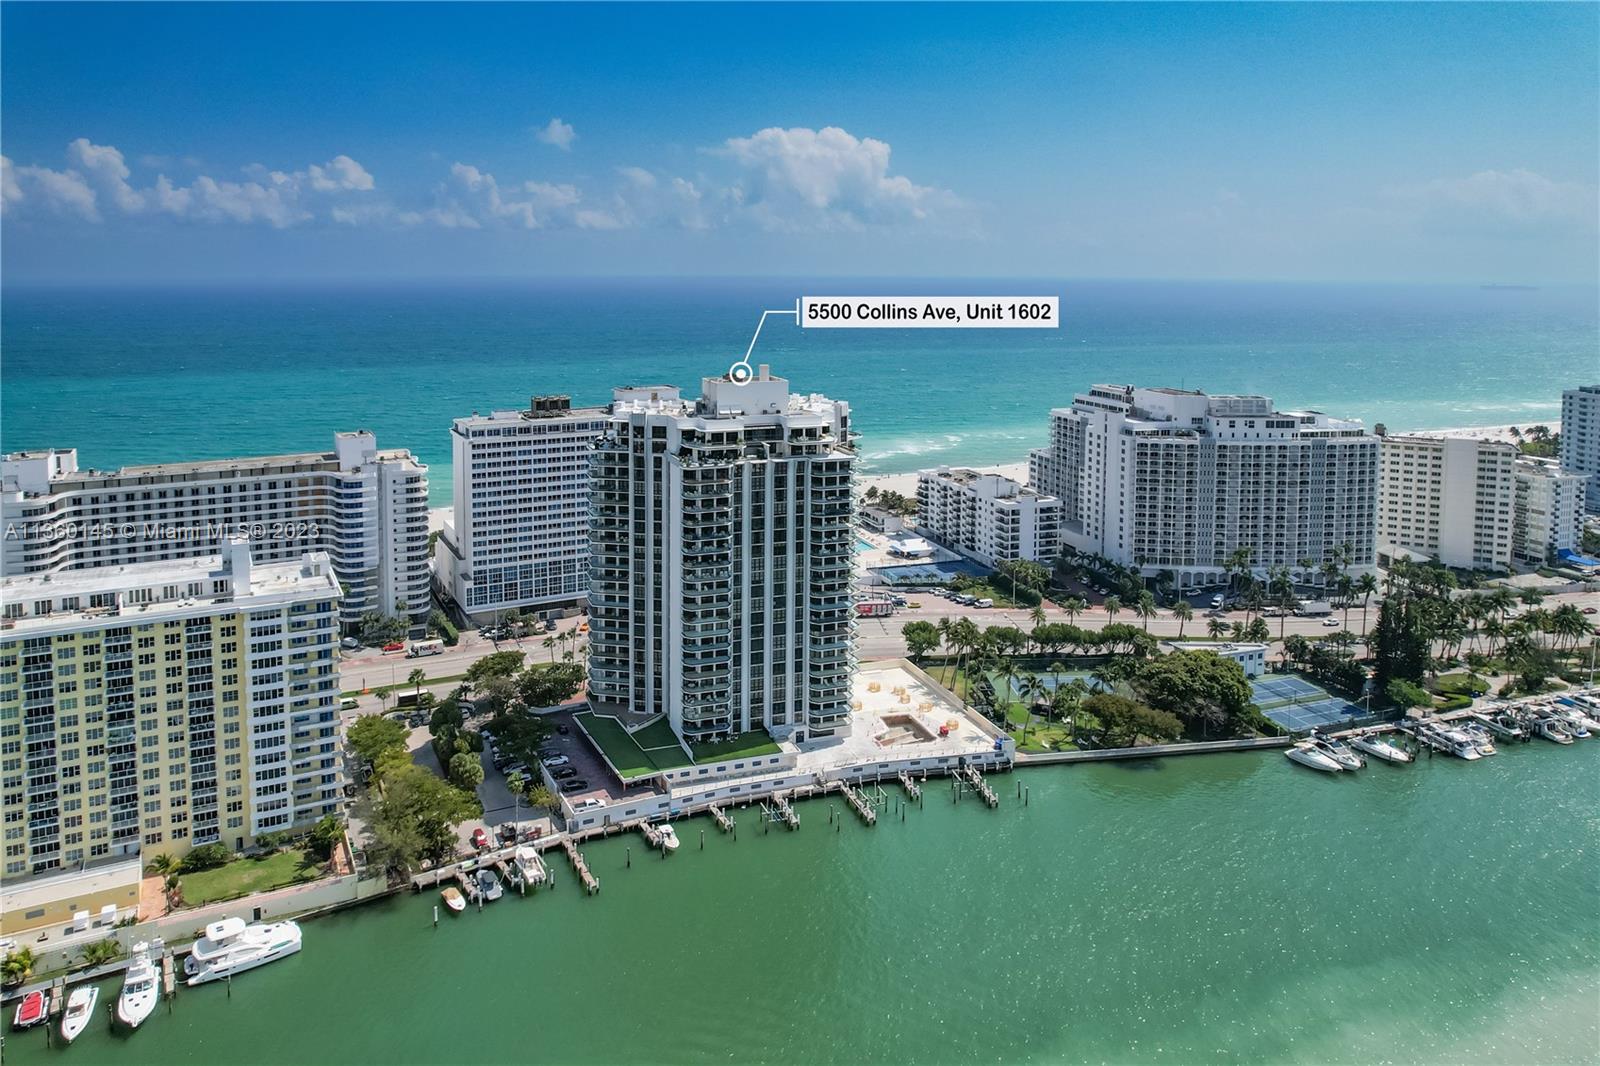 Incredible opportunity to bring your designer/architect to redesign this special space and make it your own! This almost 3,000 SF unit has breathtaking open water views of the Indian Creek canal, Biscayne Bay and the Miami skyline. Enjoy spectacular sunsets and boats cruising by from your large newly renovated balcony. Currently configured as a 2-Bed, 3.5-Bath, it is easy to convert to a 3-Bed. Towerhouse is a full-service condo with 24hr front desk, concierge, valet, in-house restaurant, pool, fitness room and tennis court! Prime Miami Beach location on “Millionaire’s Row” across from the beach, near Fontainebleau Hotel, Soho House and Faena District. Only minutes to Bal Harbour and South Beach, as well as easy access to Miami Intl. Airport. *Some images have been virtually staged.*